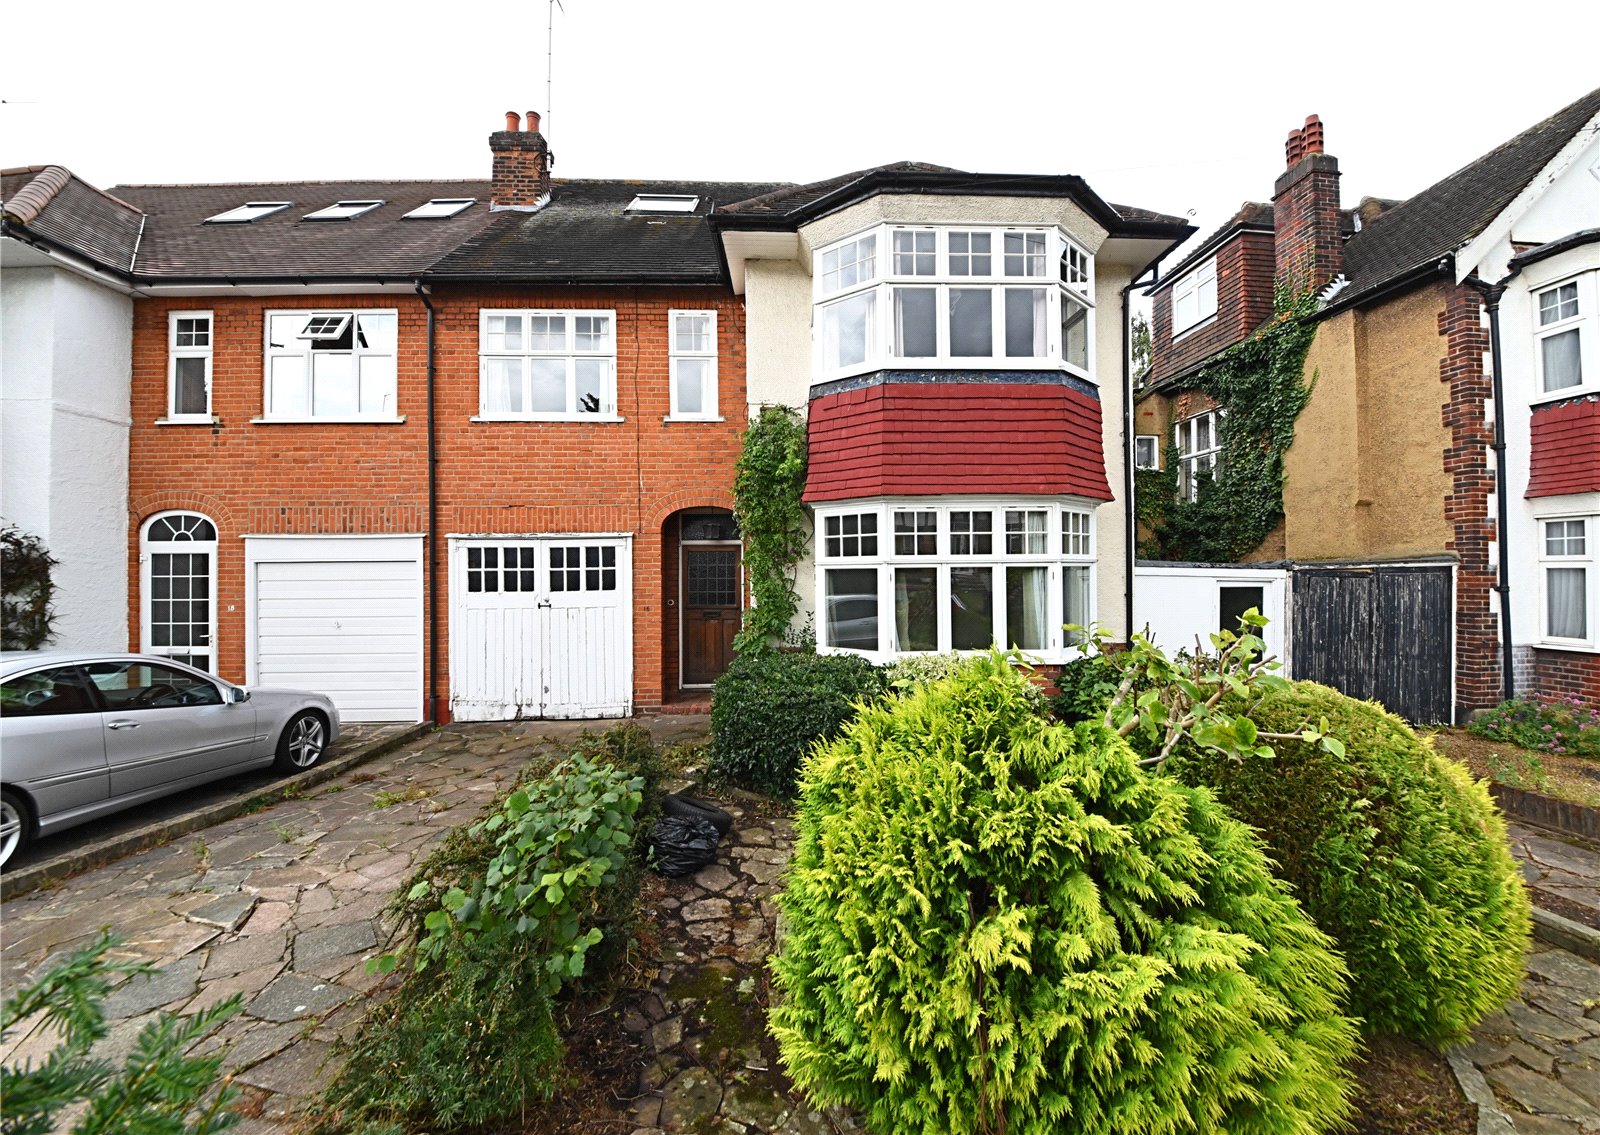 4 bed house for sale in Rowben Close, Totteridge - Property Image 1